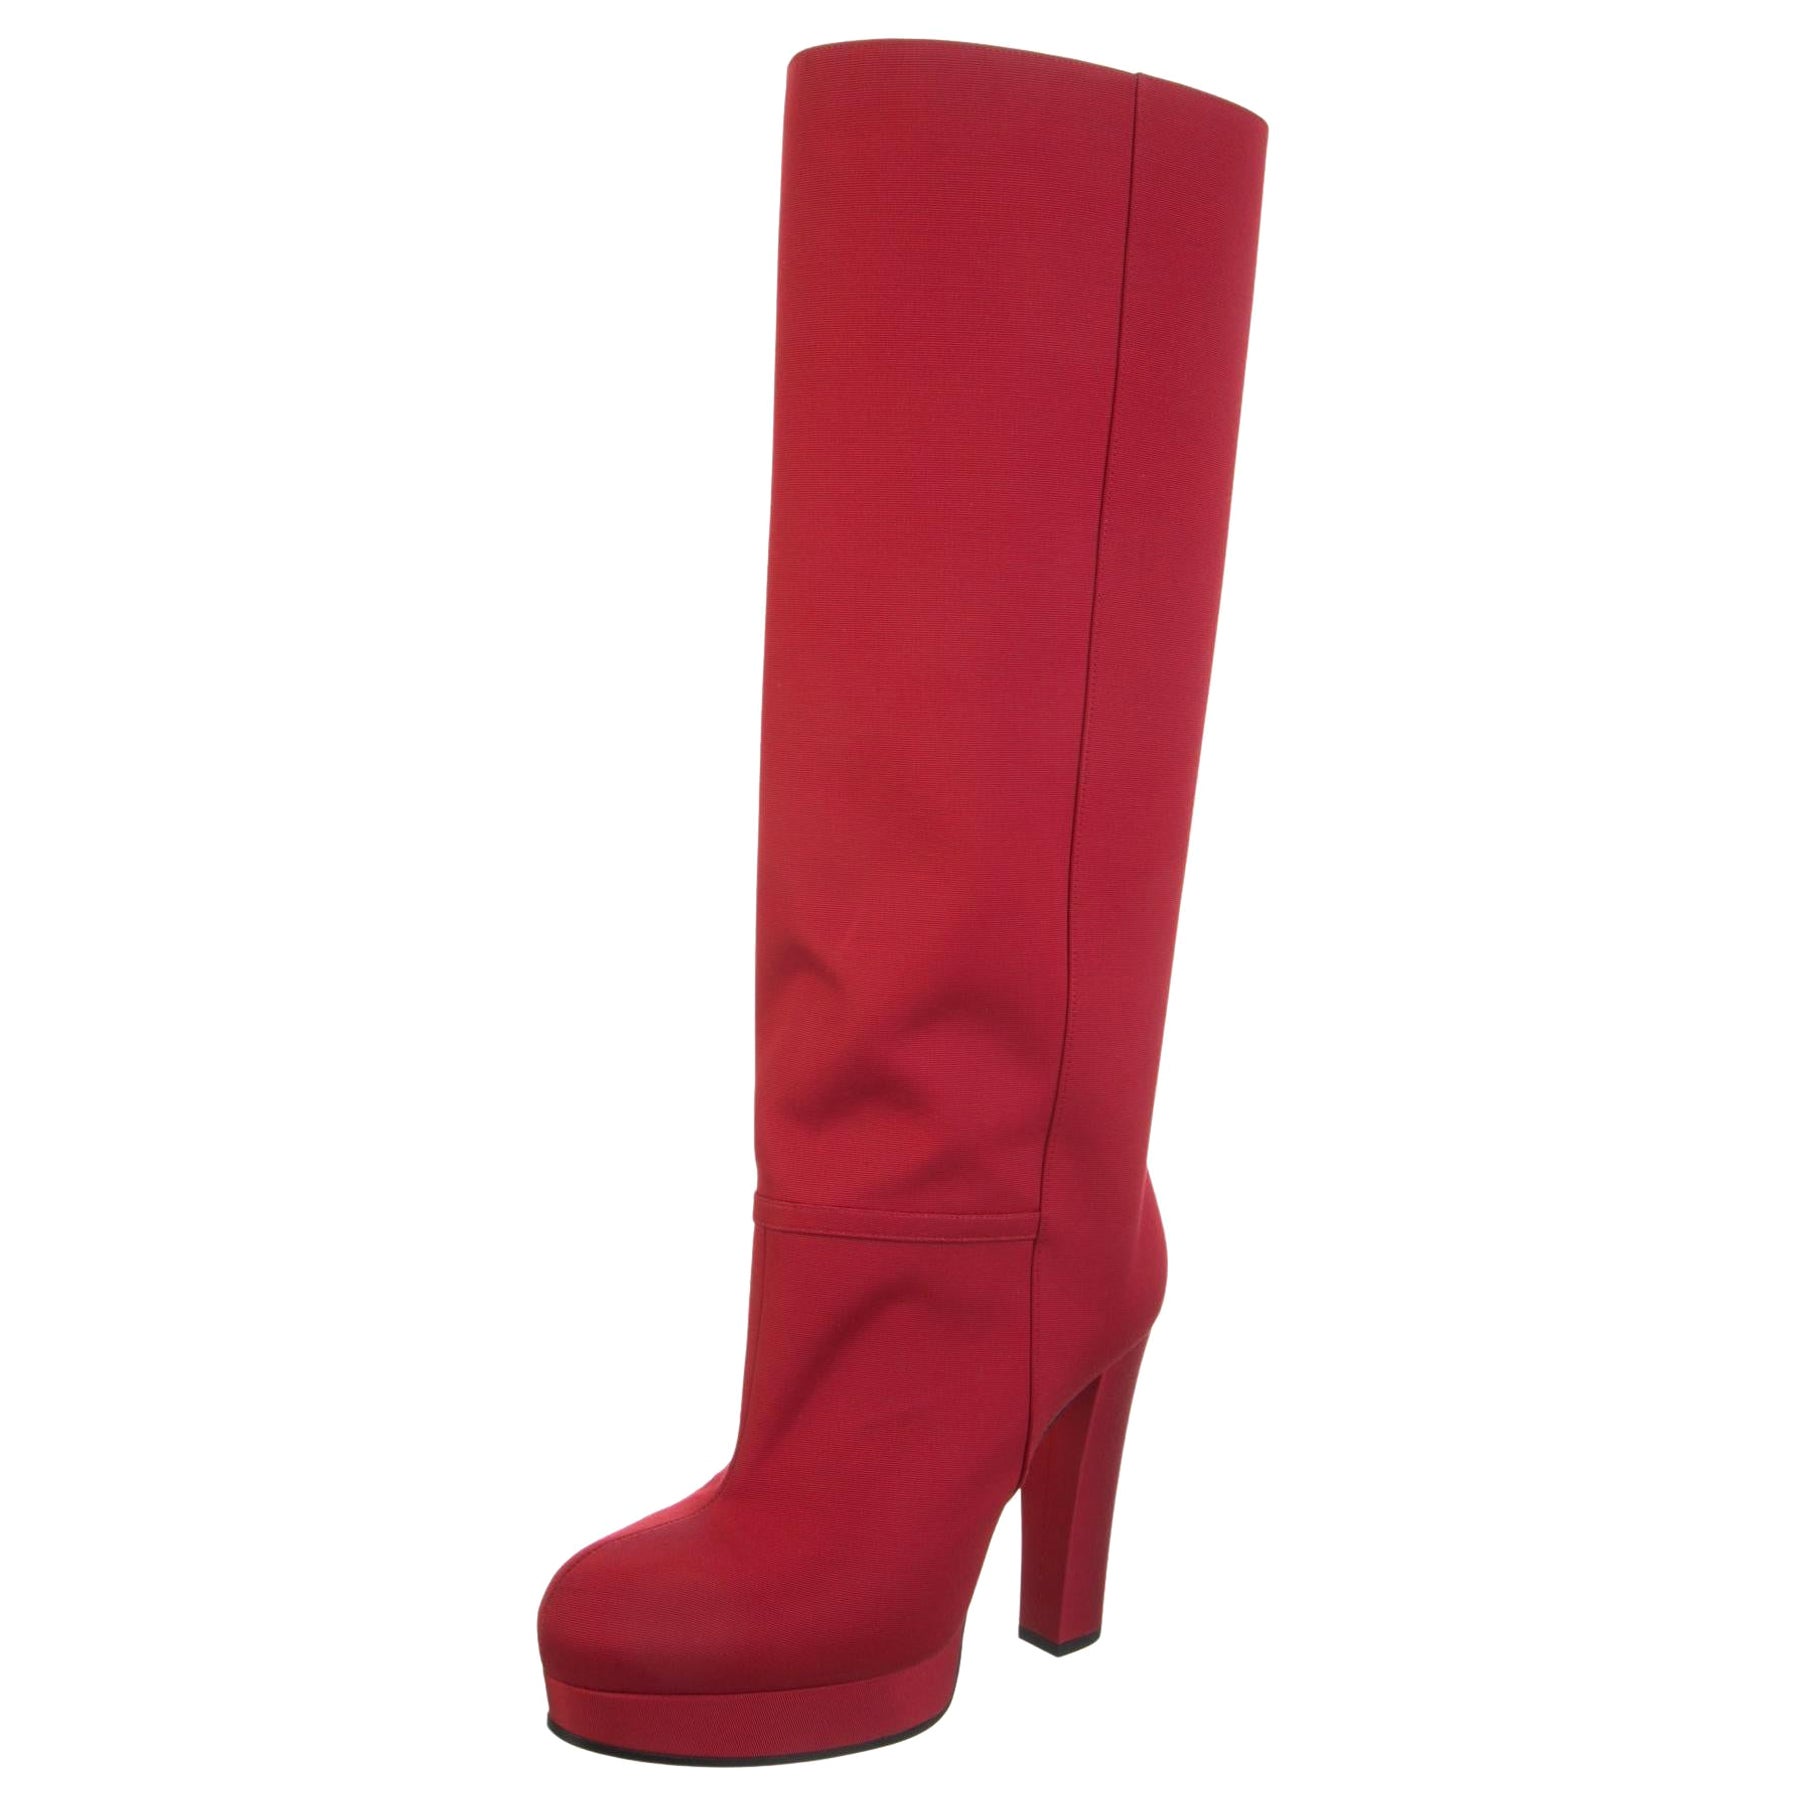 New With Box Gucci Fall 2019 Alessandro Michele Red Boots Sz 38 en vente